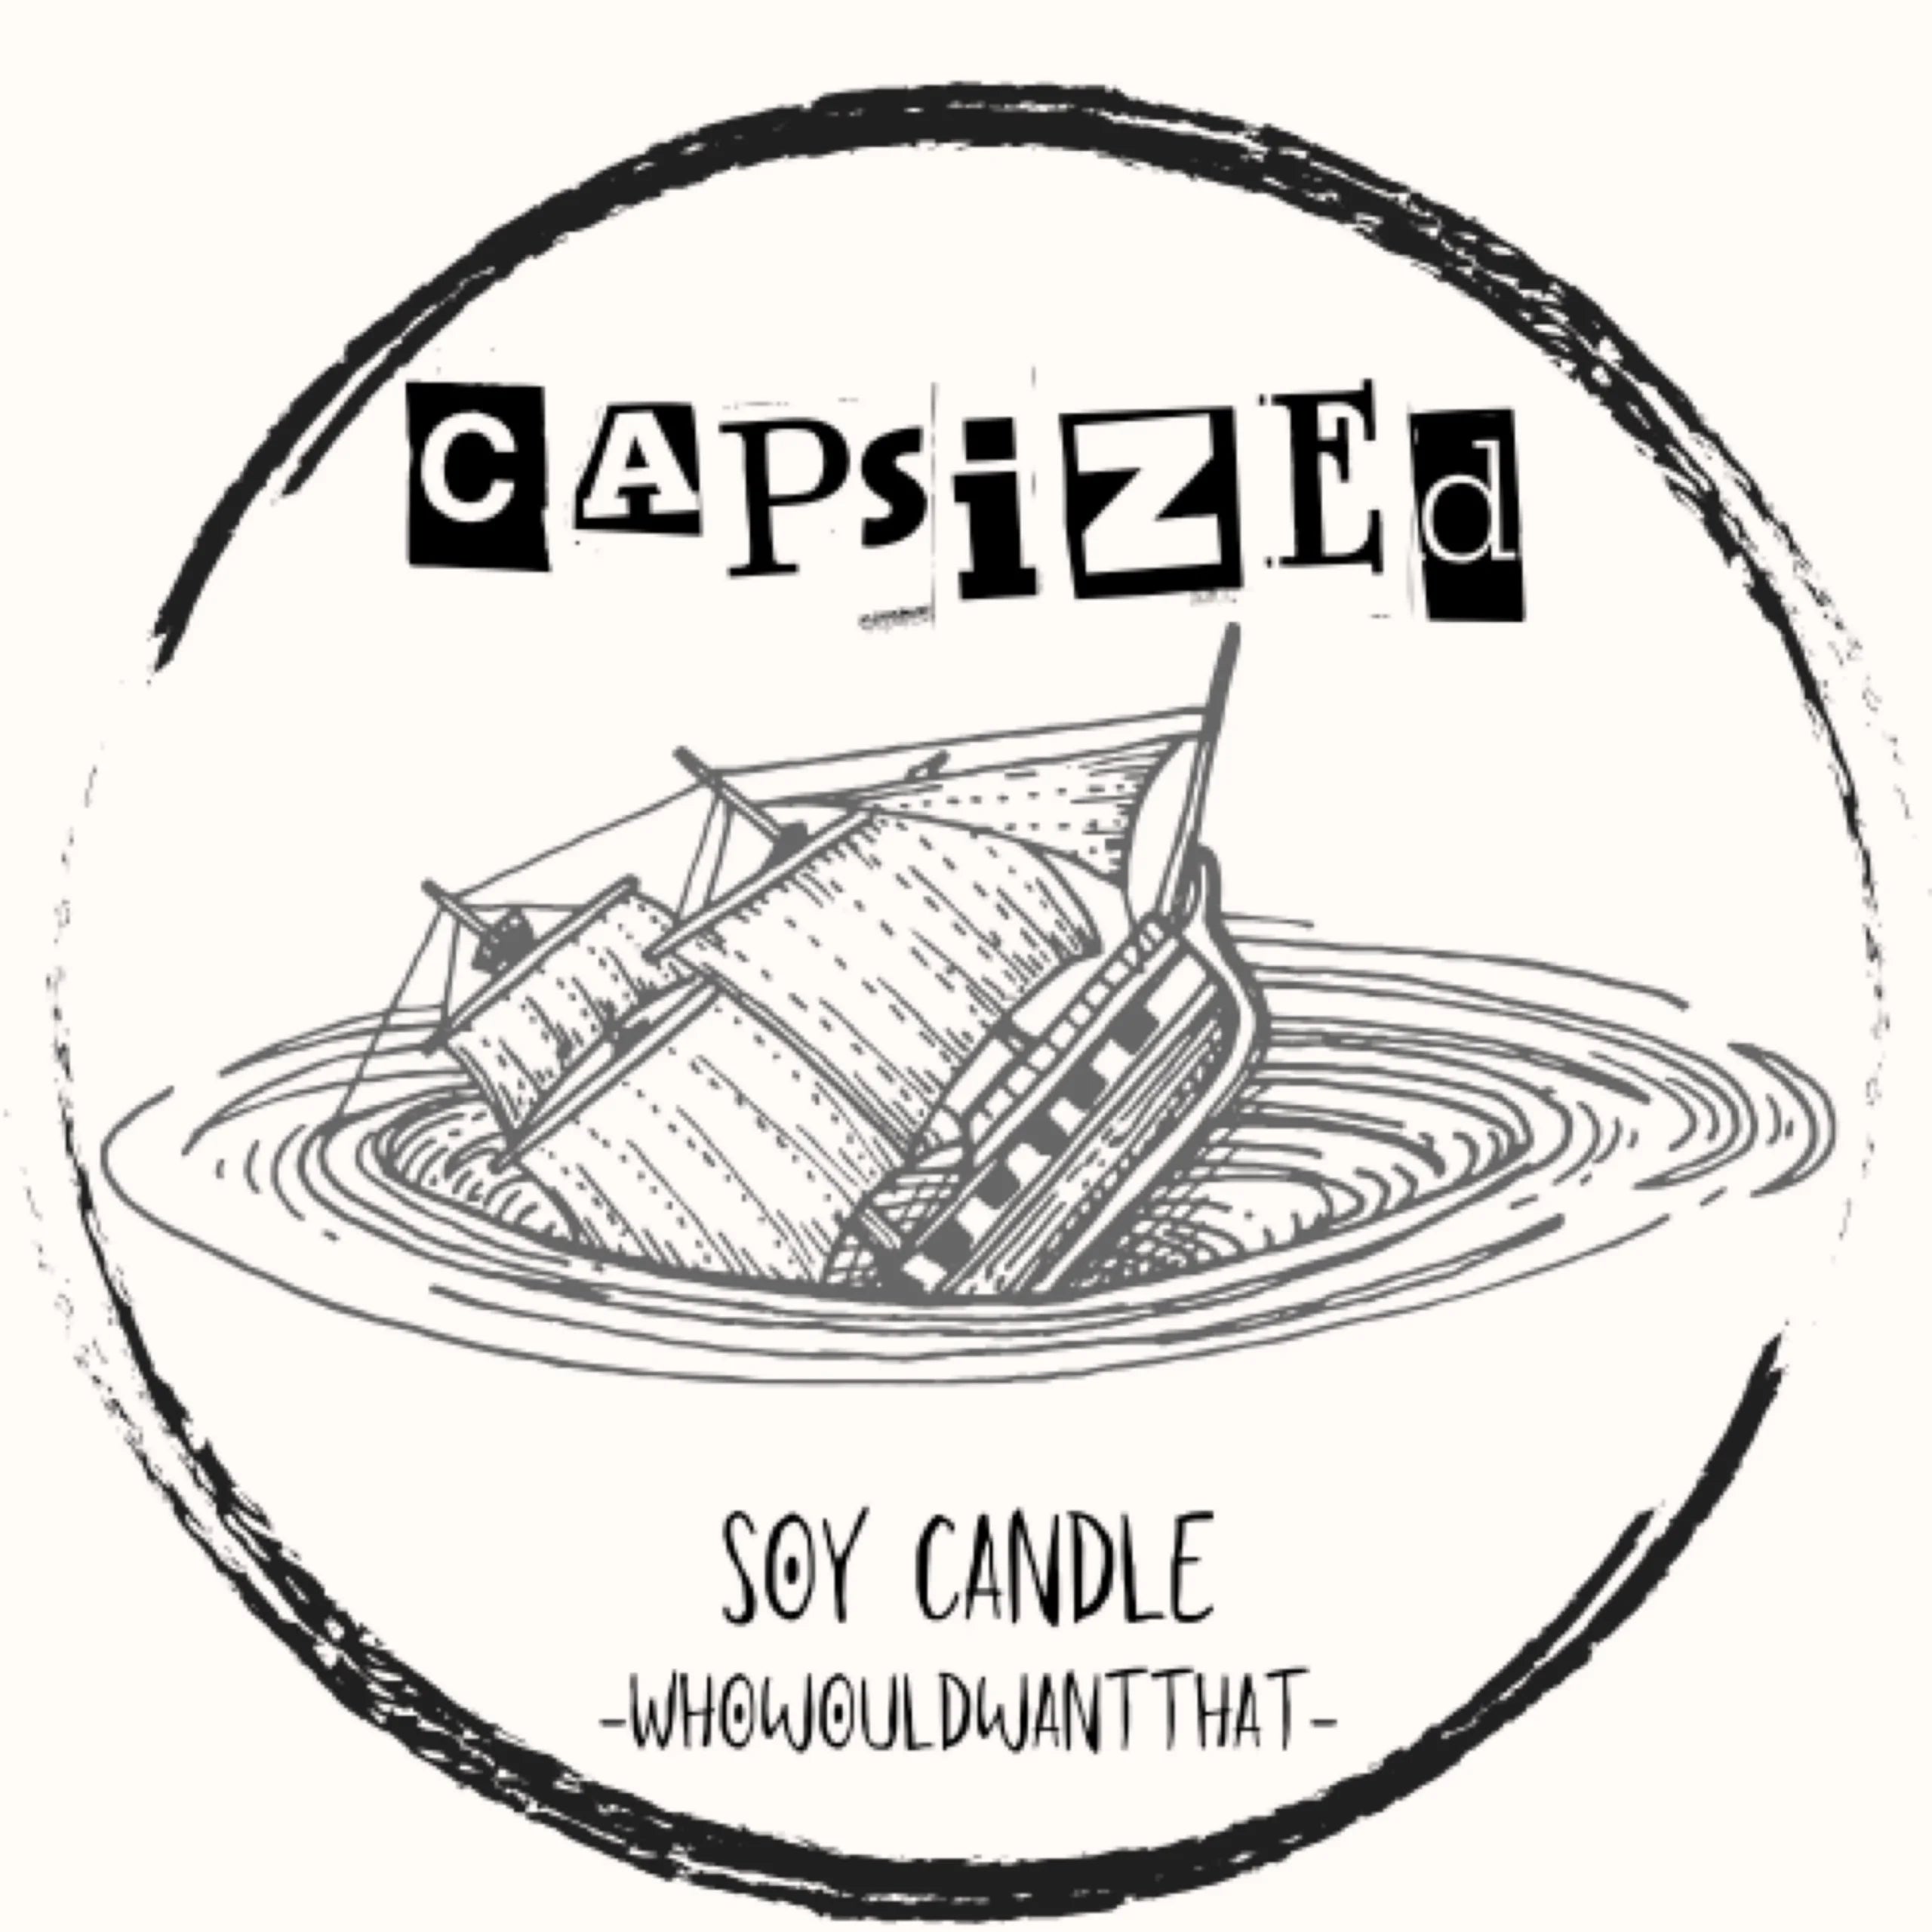 Capsized Candle - 8 oz Scented Soy Candle - Who Would Want That